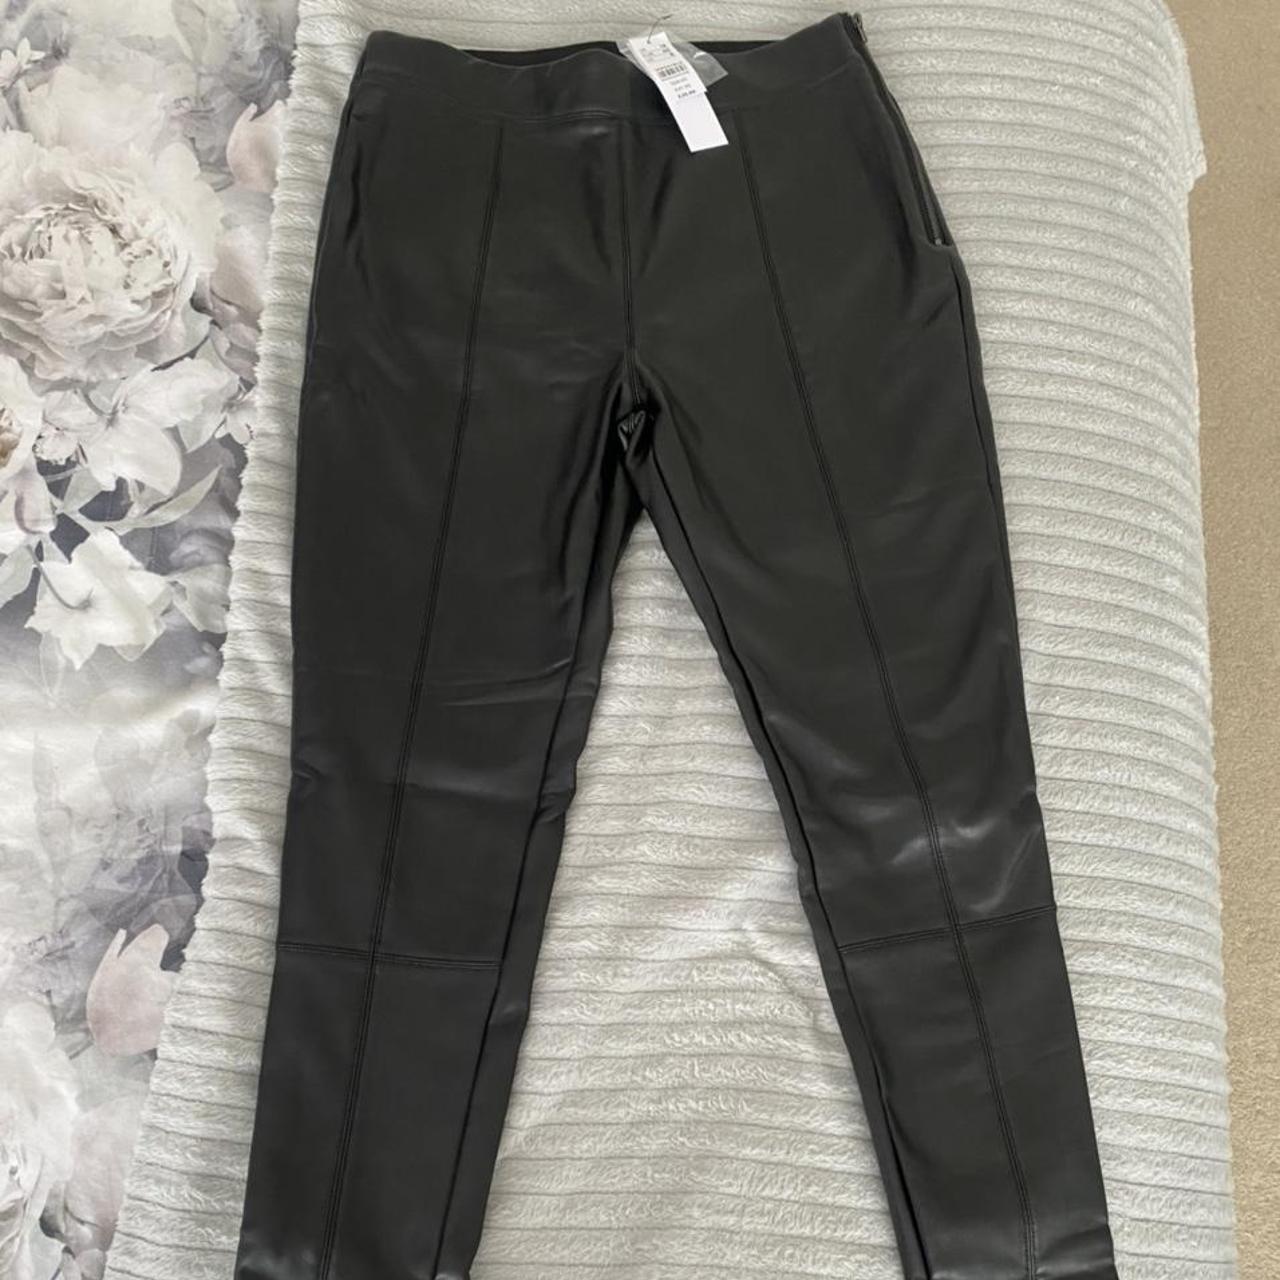 Topshop leather legging. Brand new with tags. Size - Depop